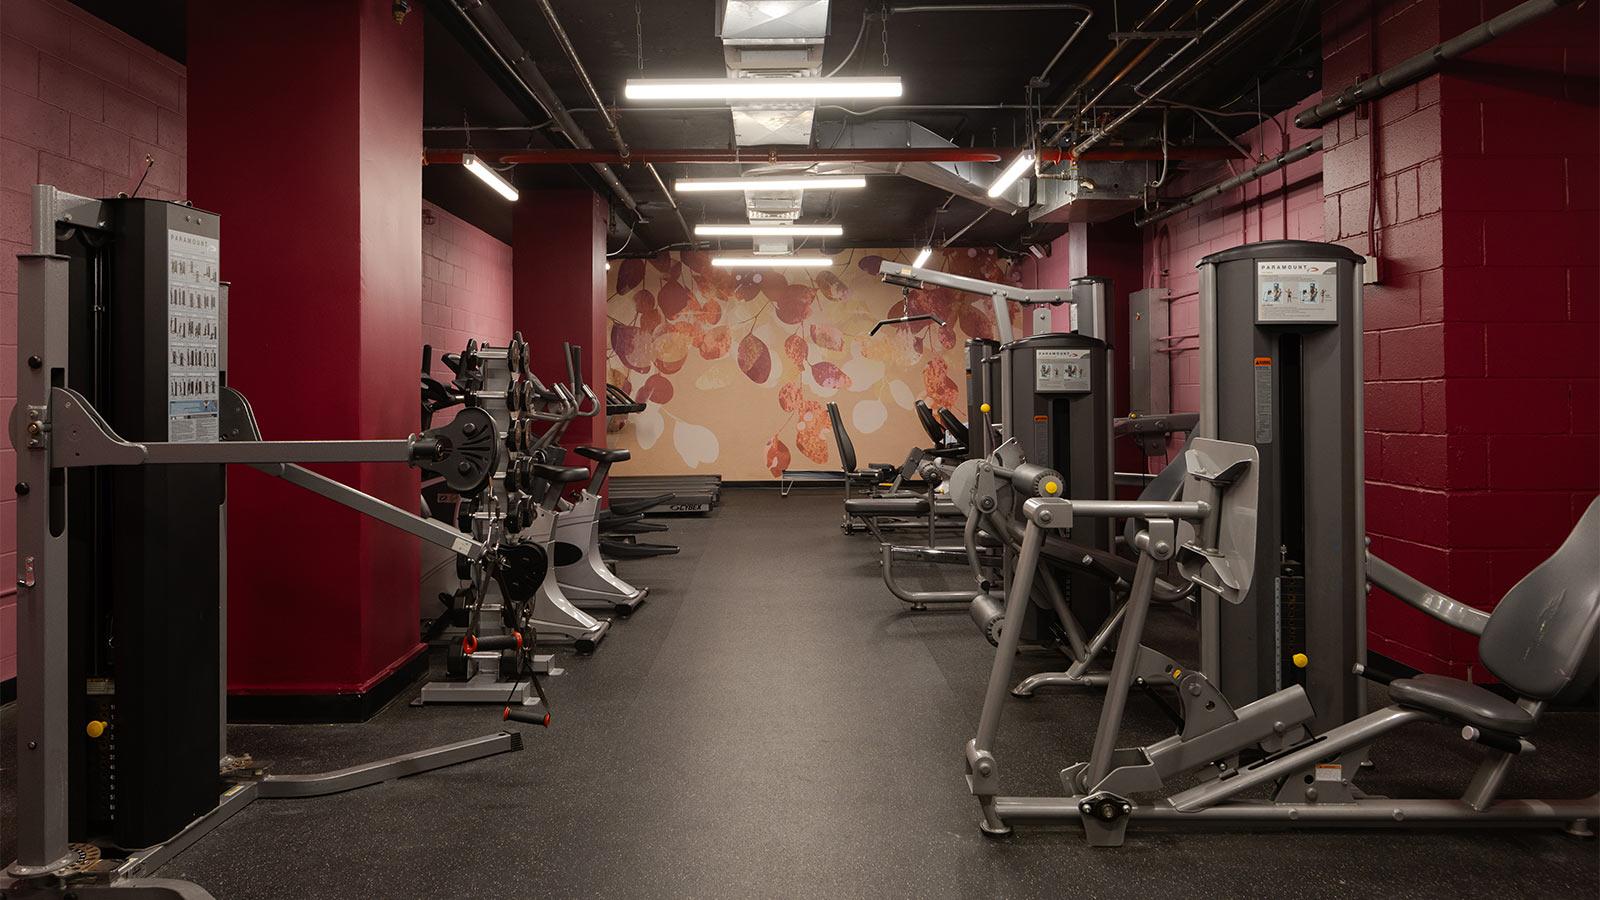 Fitness Room at 55 John Street on the Pace University Campus in New York City.